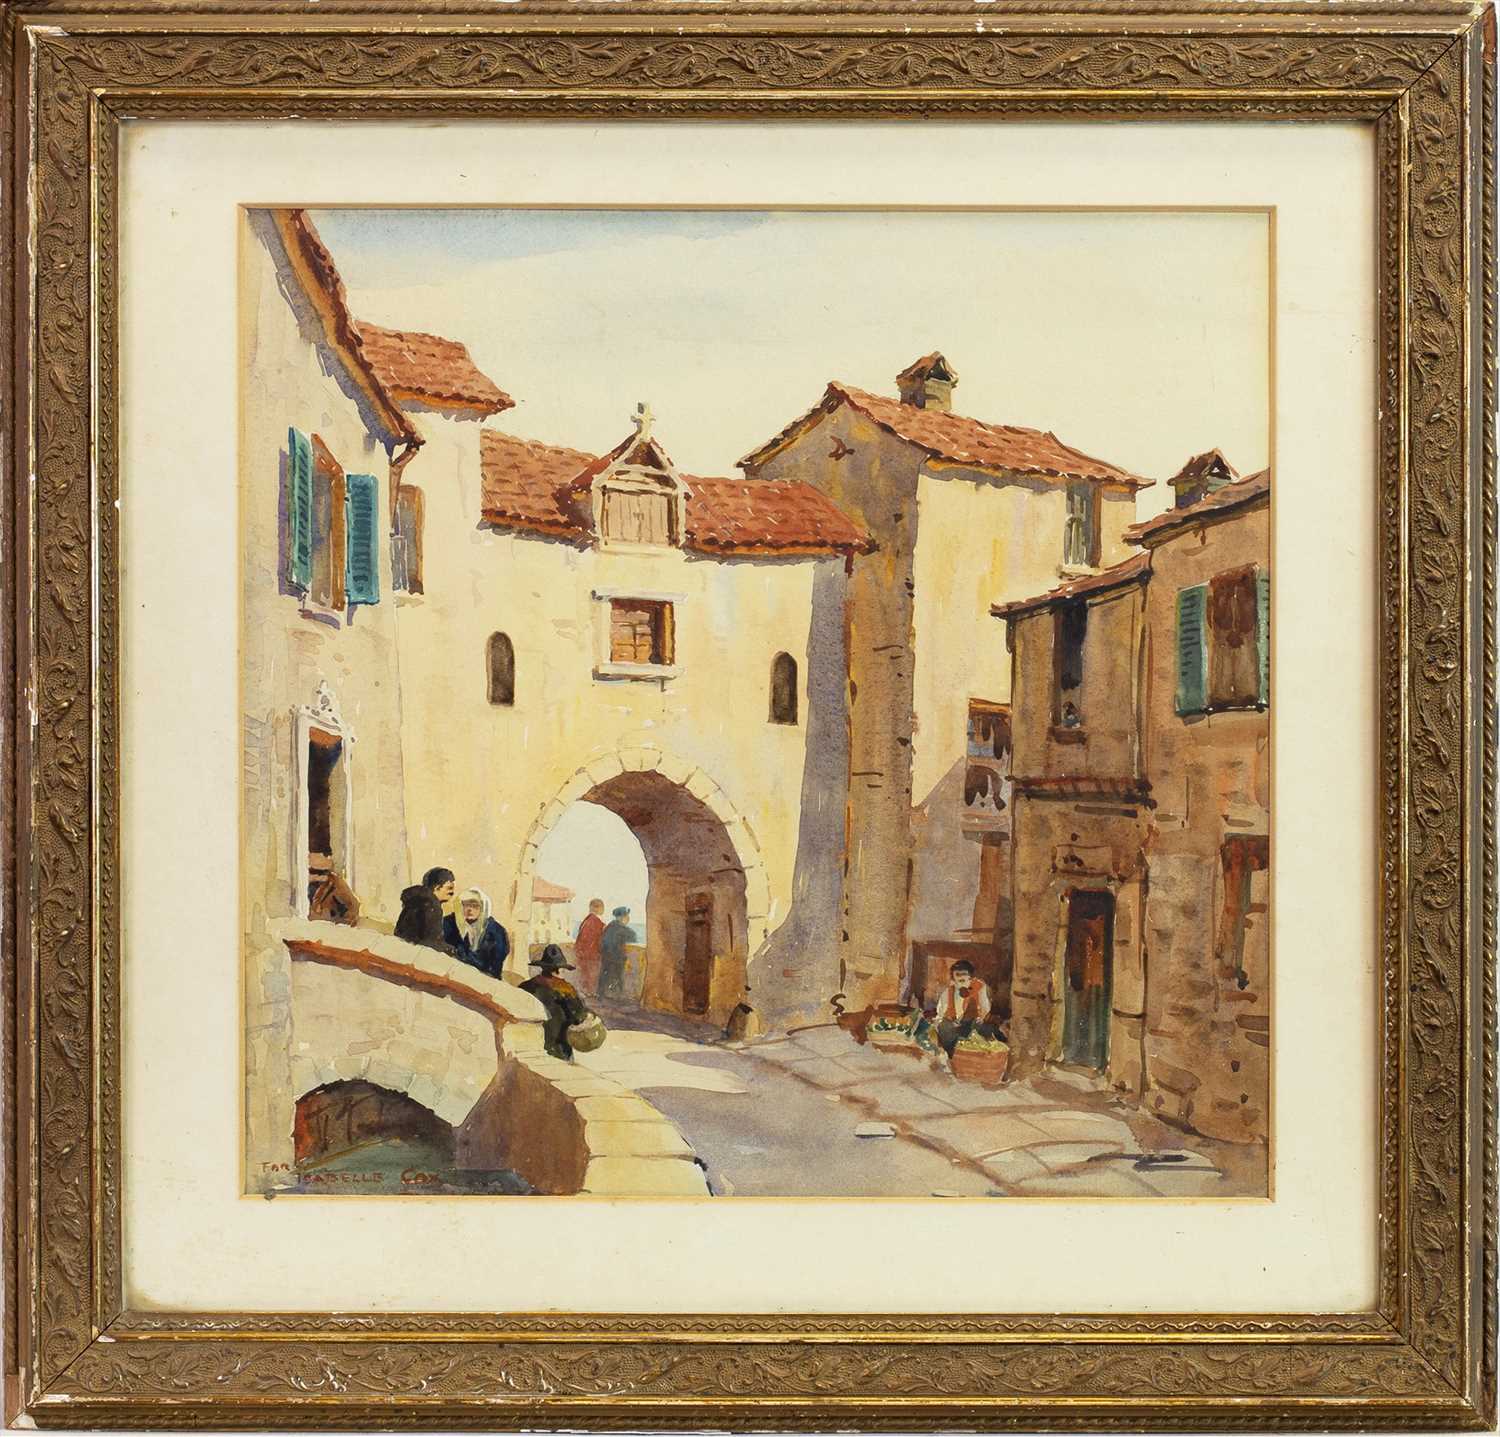 Lot 438 - ITALIAN COASTAL VILLAGE SCENE, A WATERCOLOUR IN THE STYLE OF SIR ERNEST DARYL LINDSAY